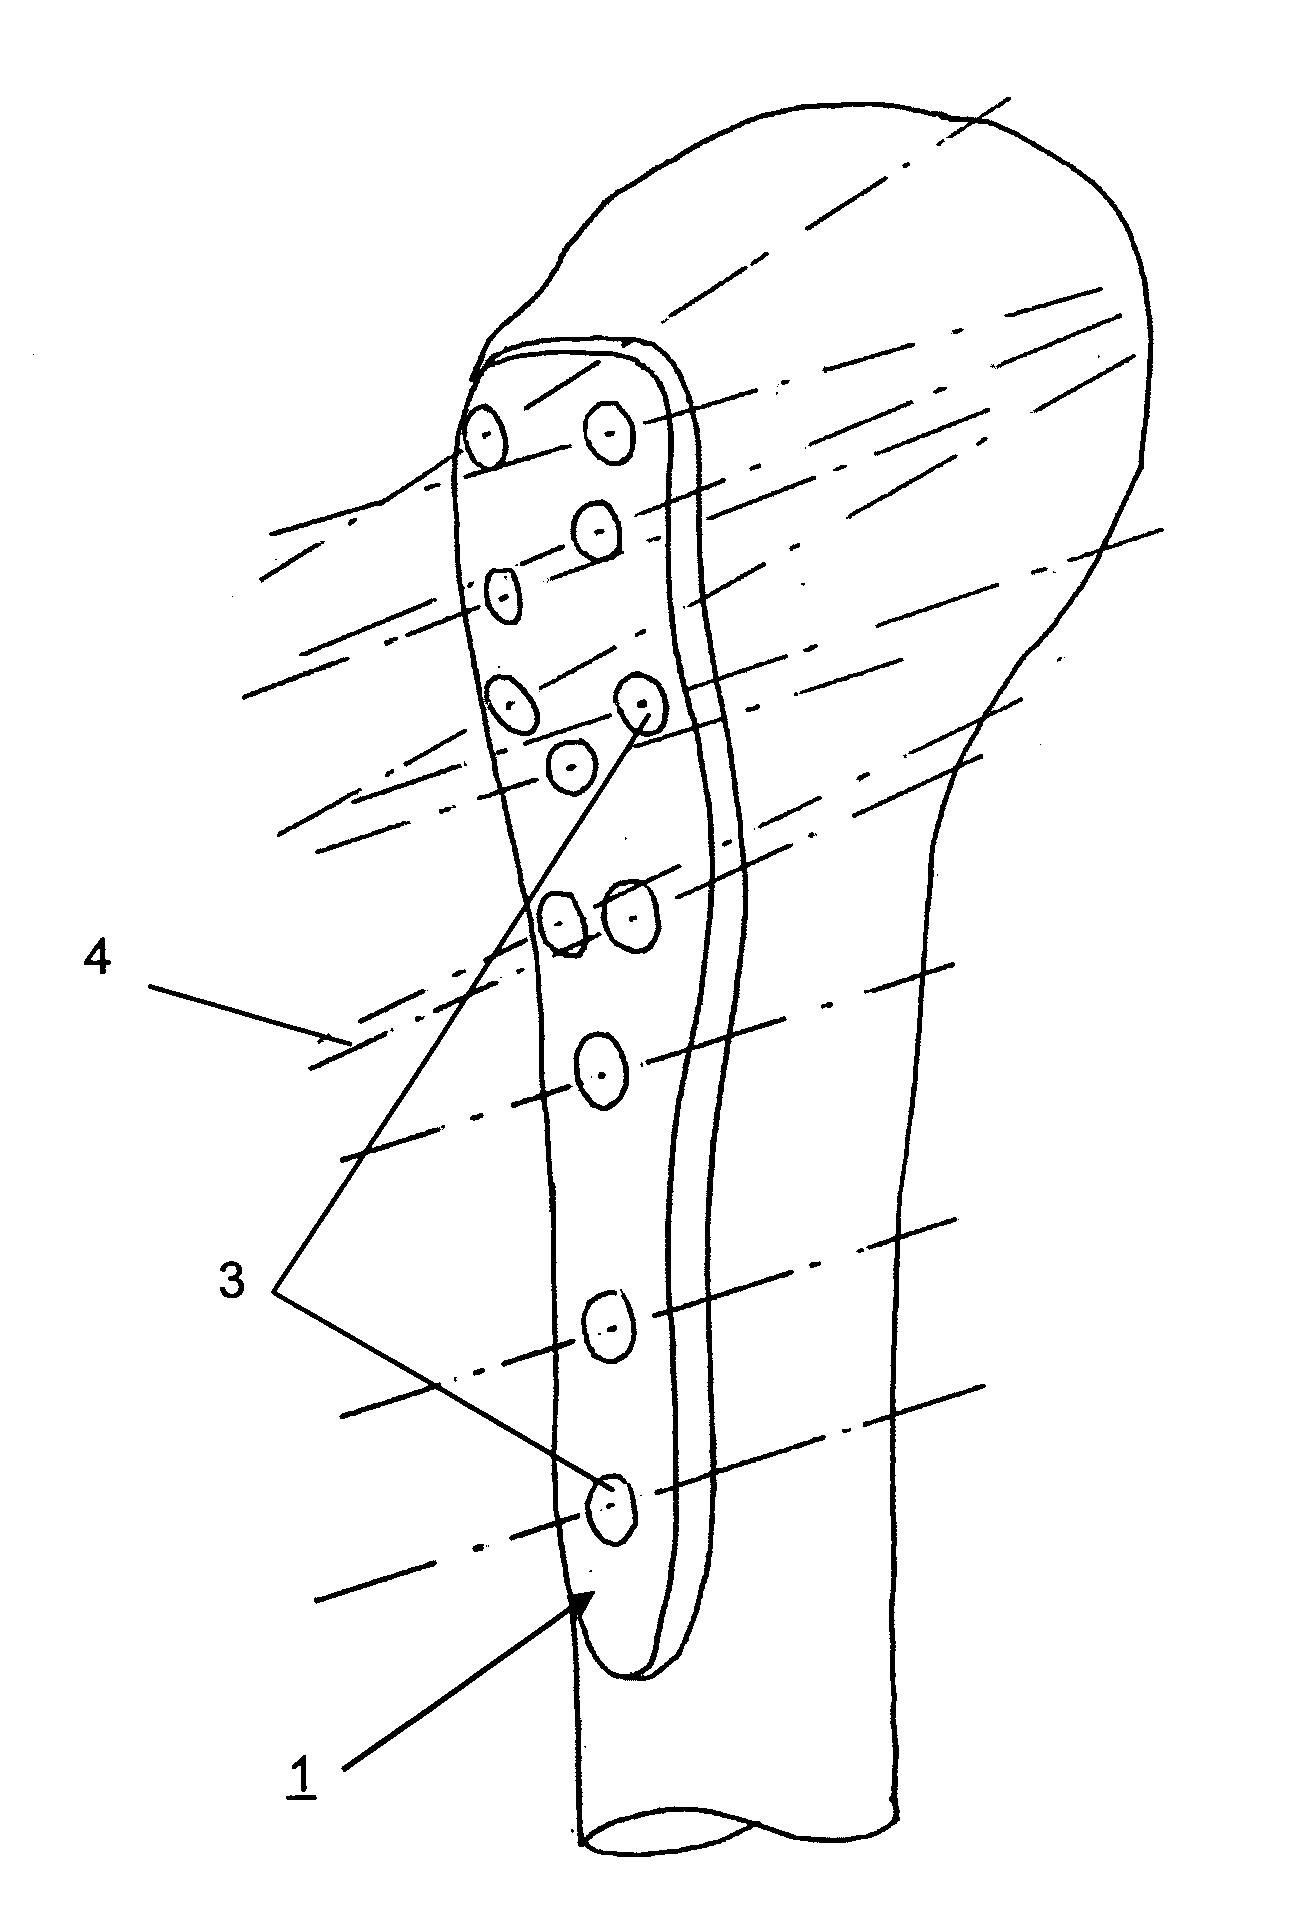 Method for designing and/or optimizing a surgical device